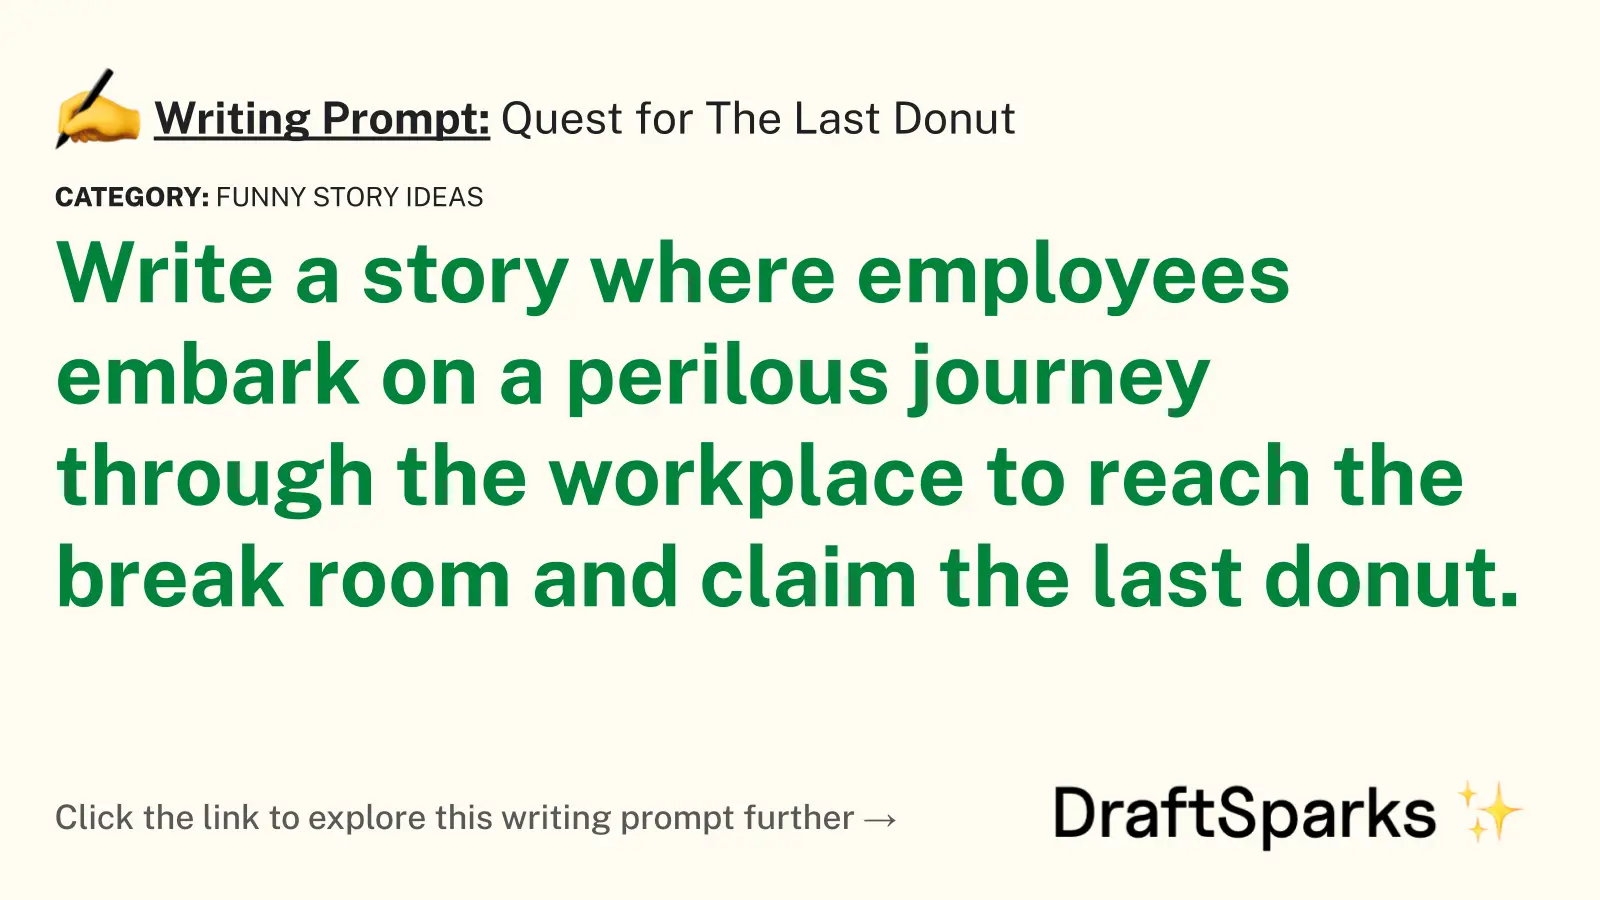 Quest for The Last Donut